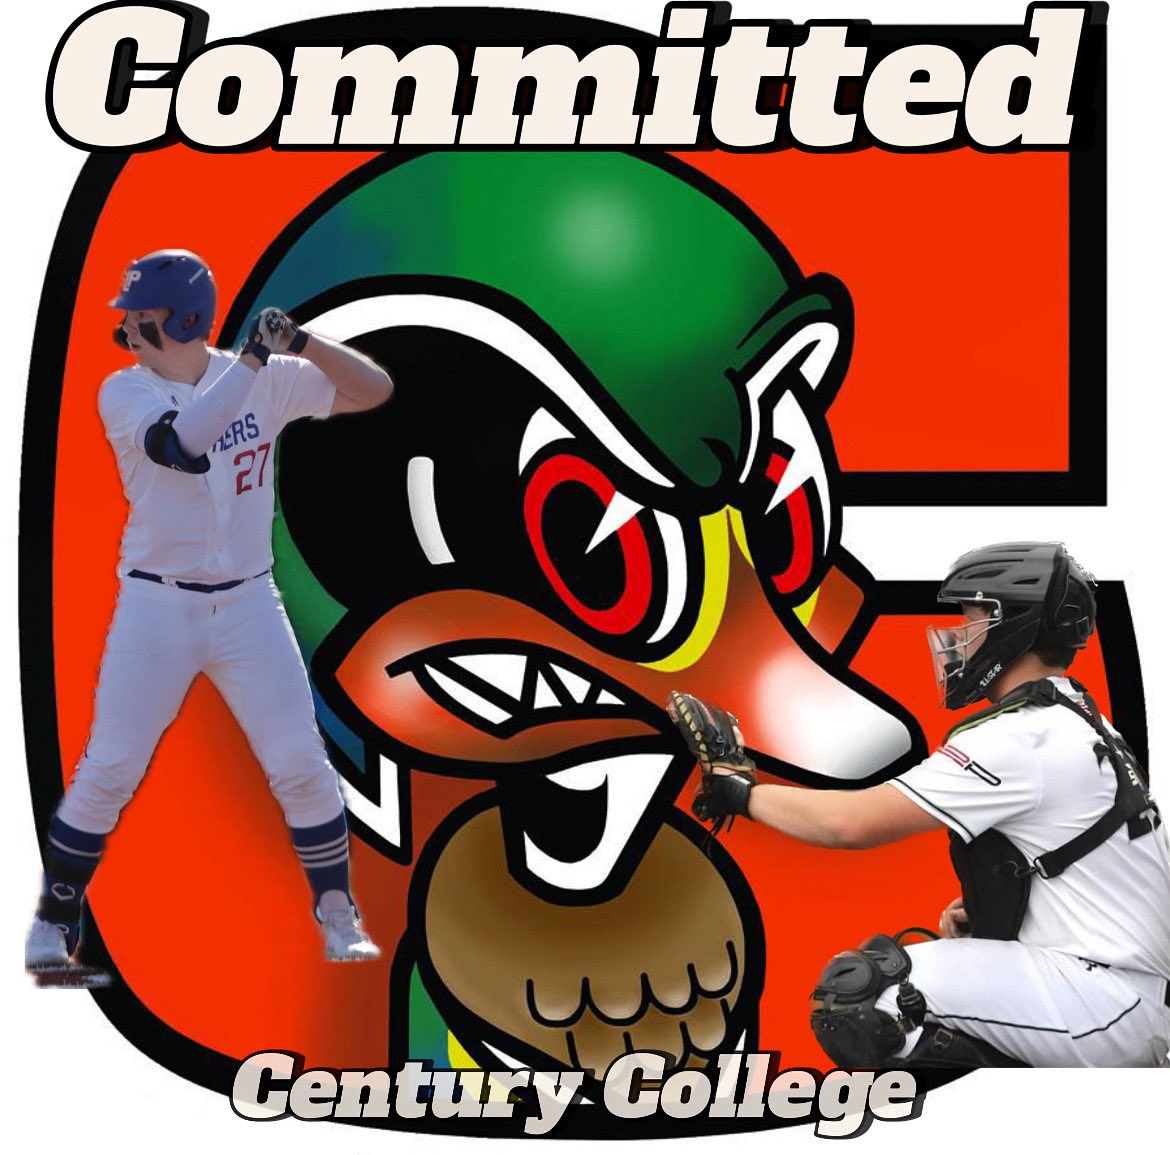 I would like to thank everyone that has helped me throughout my journey. With that being said I would like to announce that I will be continuing my baseball journey at Century College next year! 🦆 #GoDucks #jucobandit